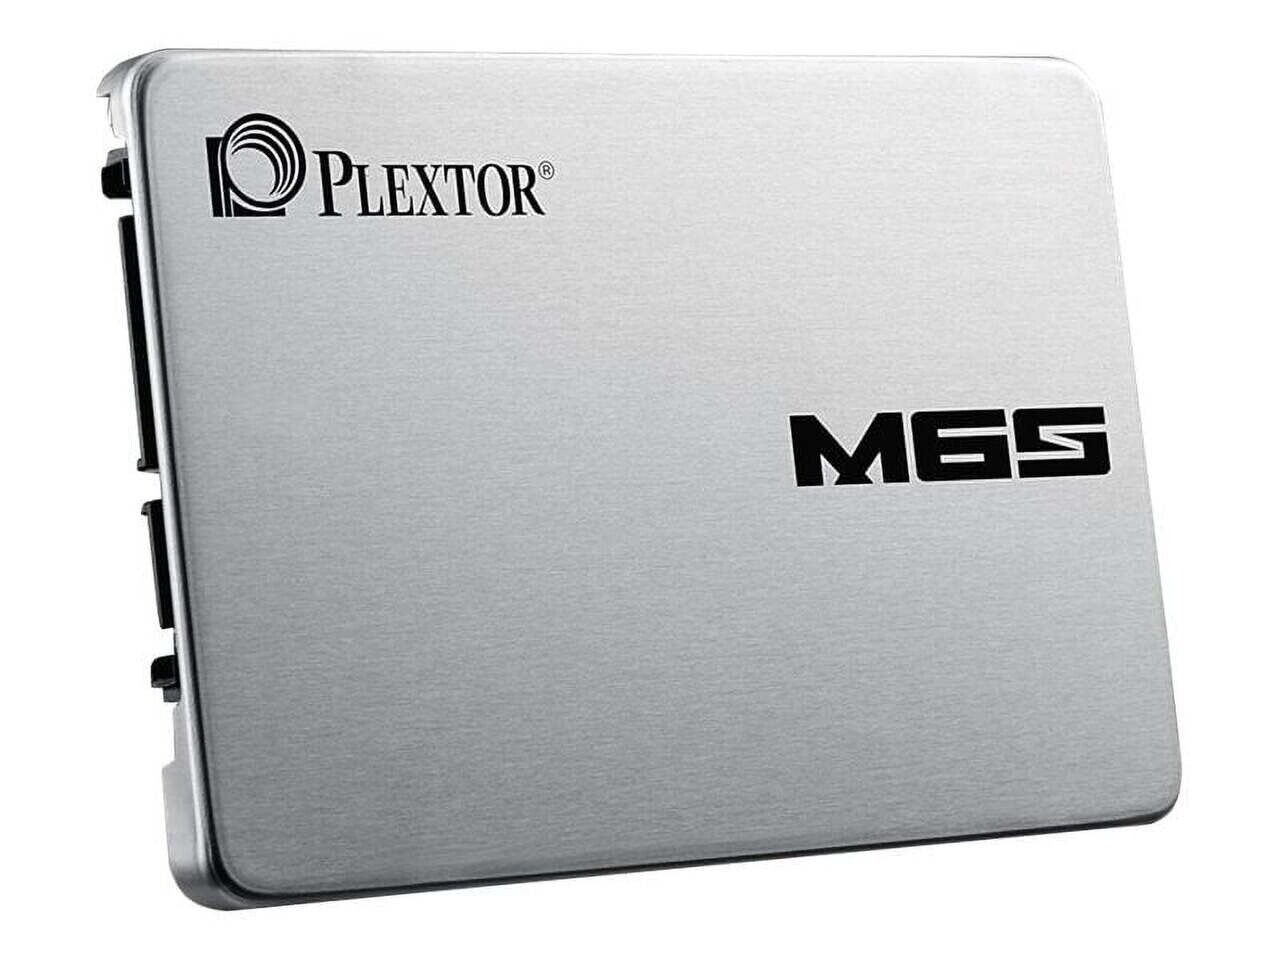 Well-known media and storage unit manufacturer Plextor – SSD is closing its doors